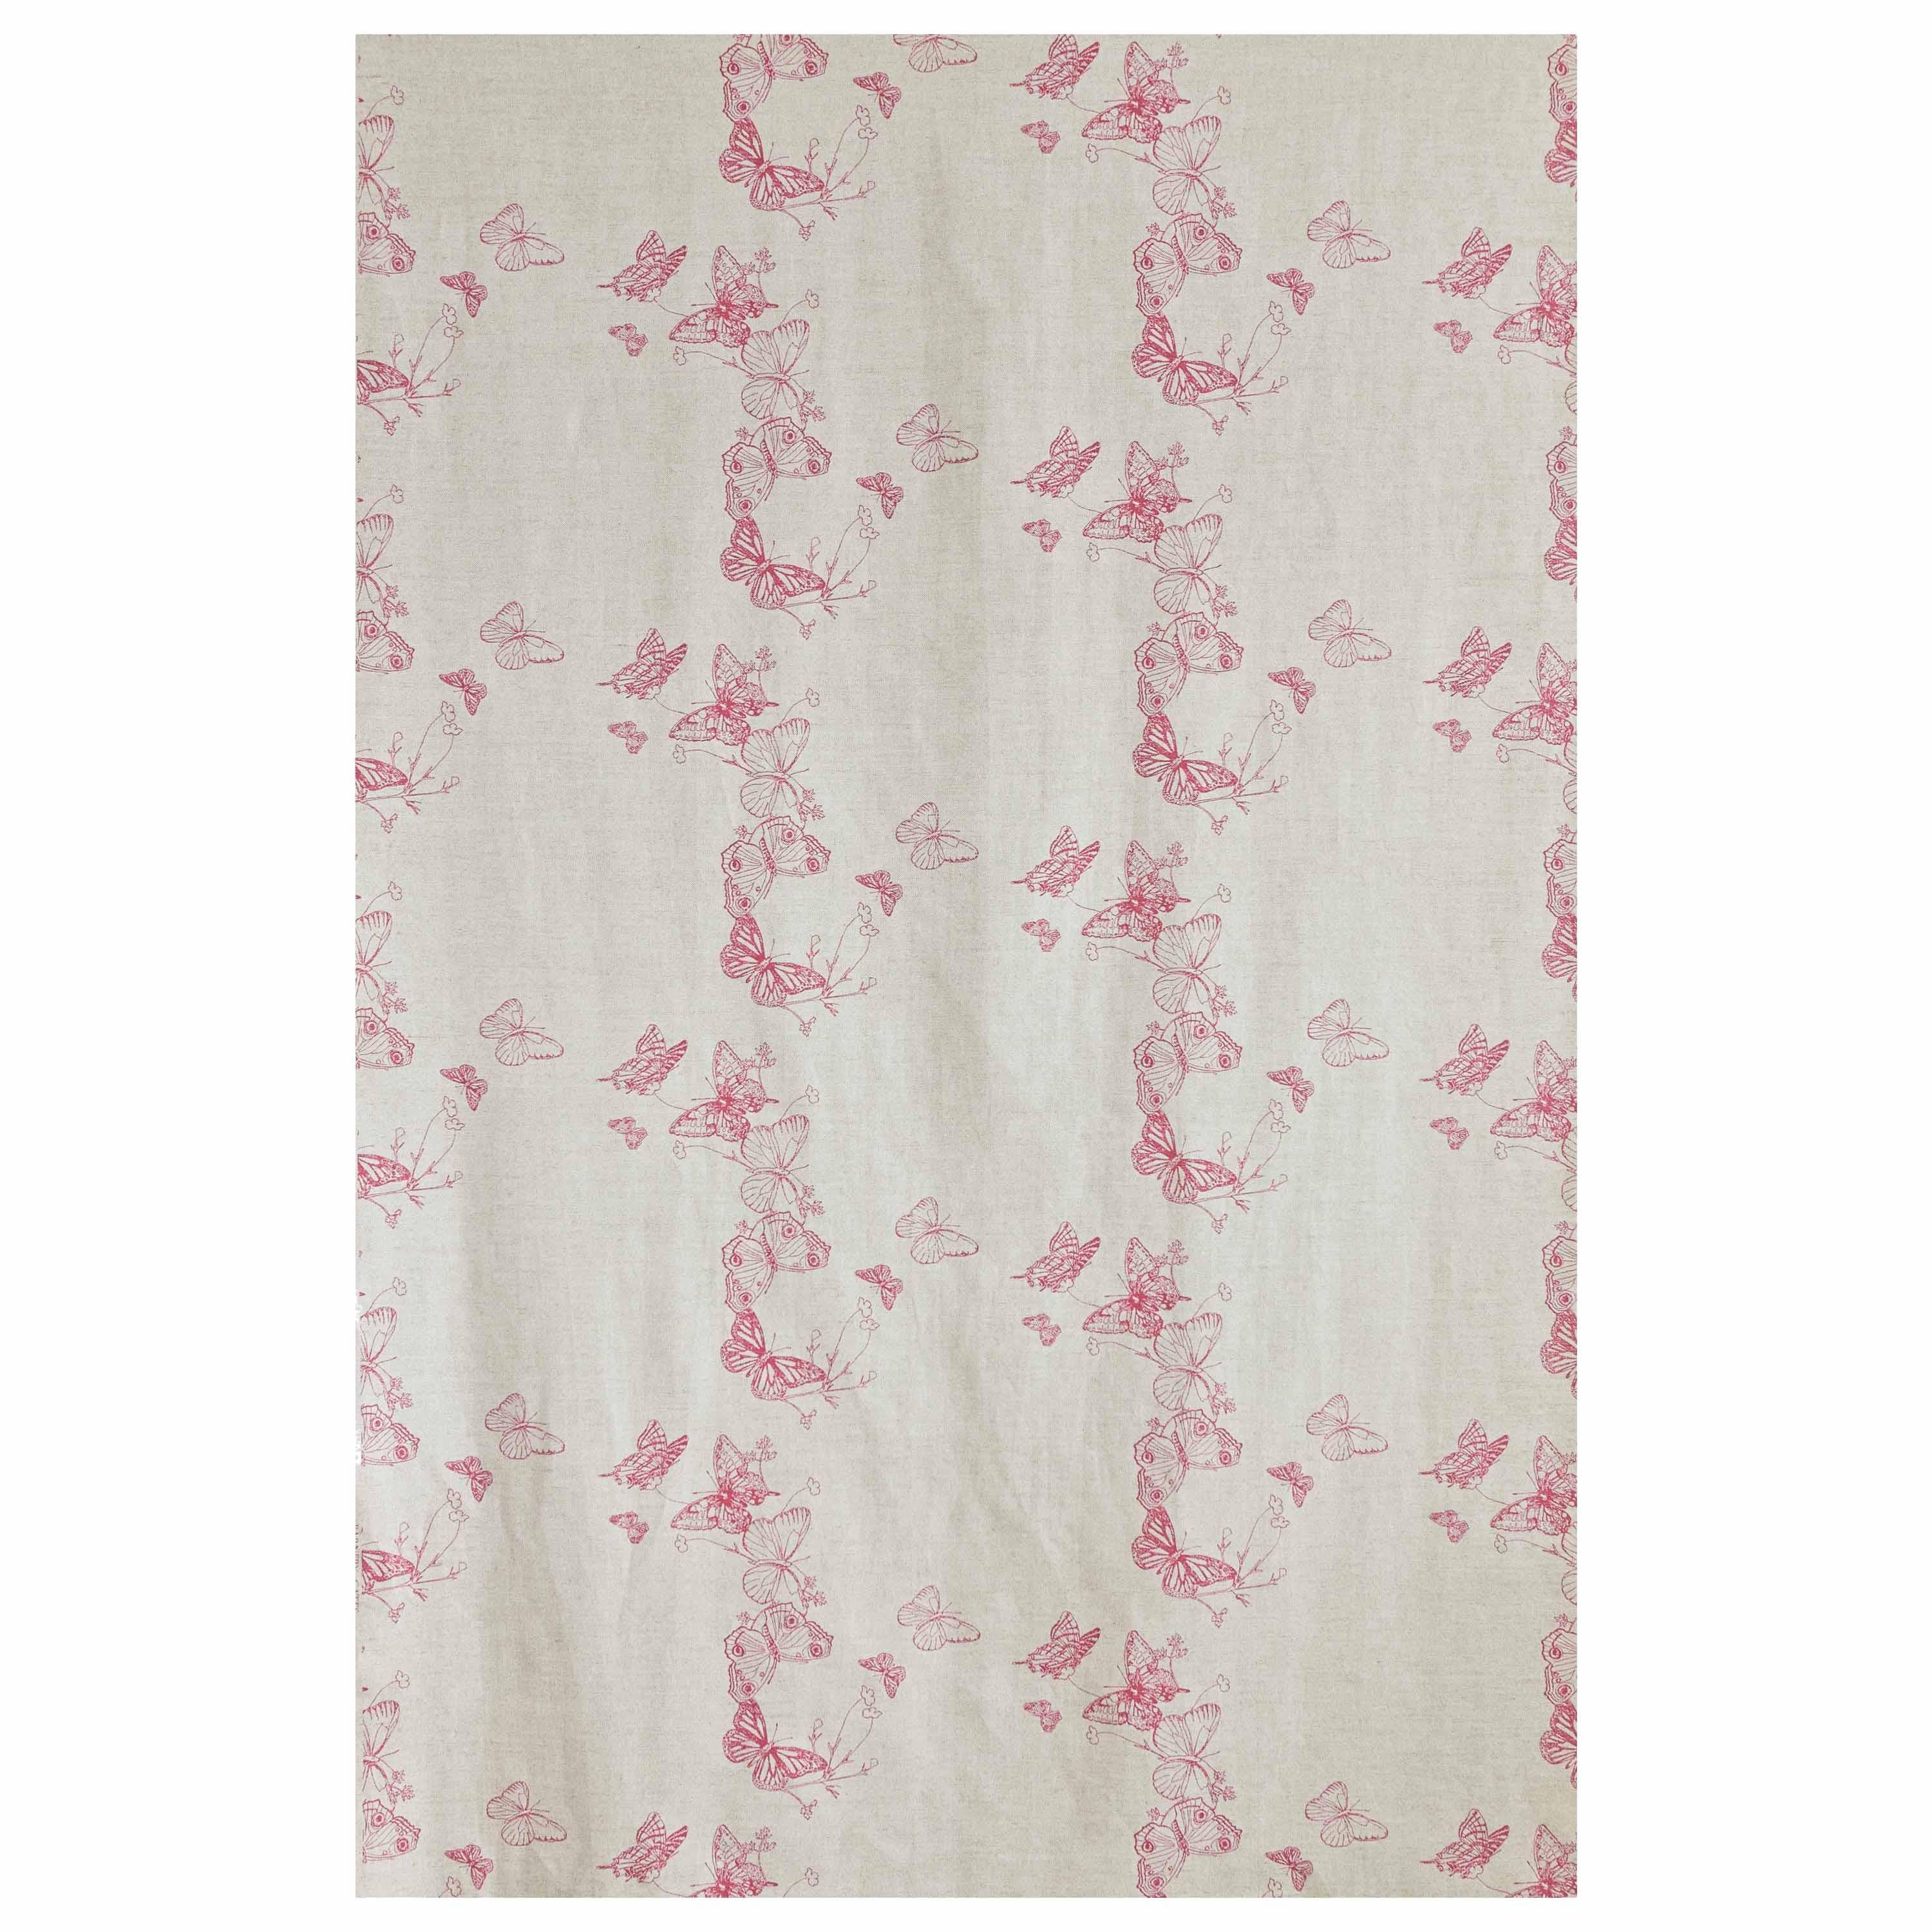 'Bugs & Butterflies' Contemporary, Traditional Fabric in Raspberry For Sale